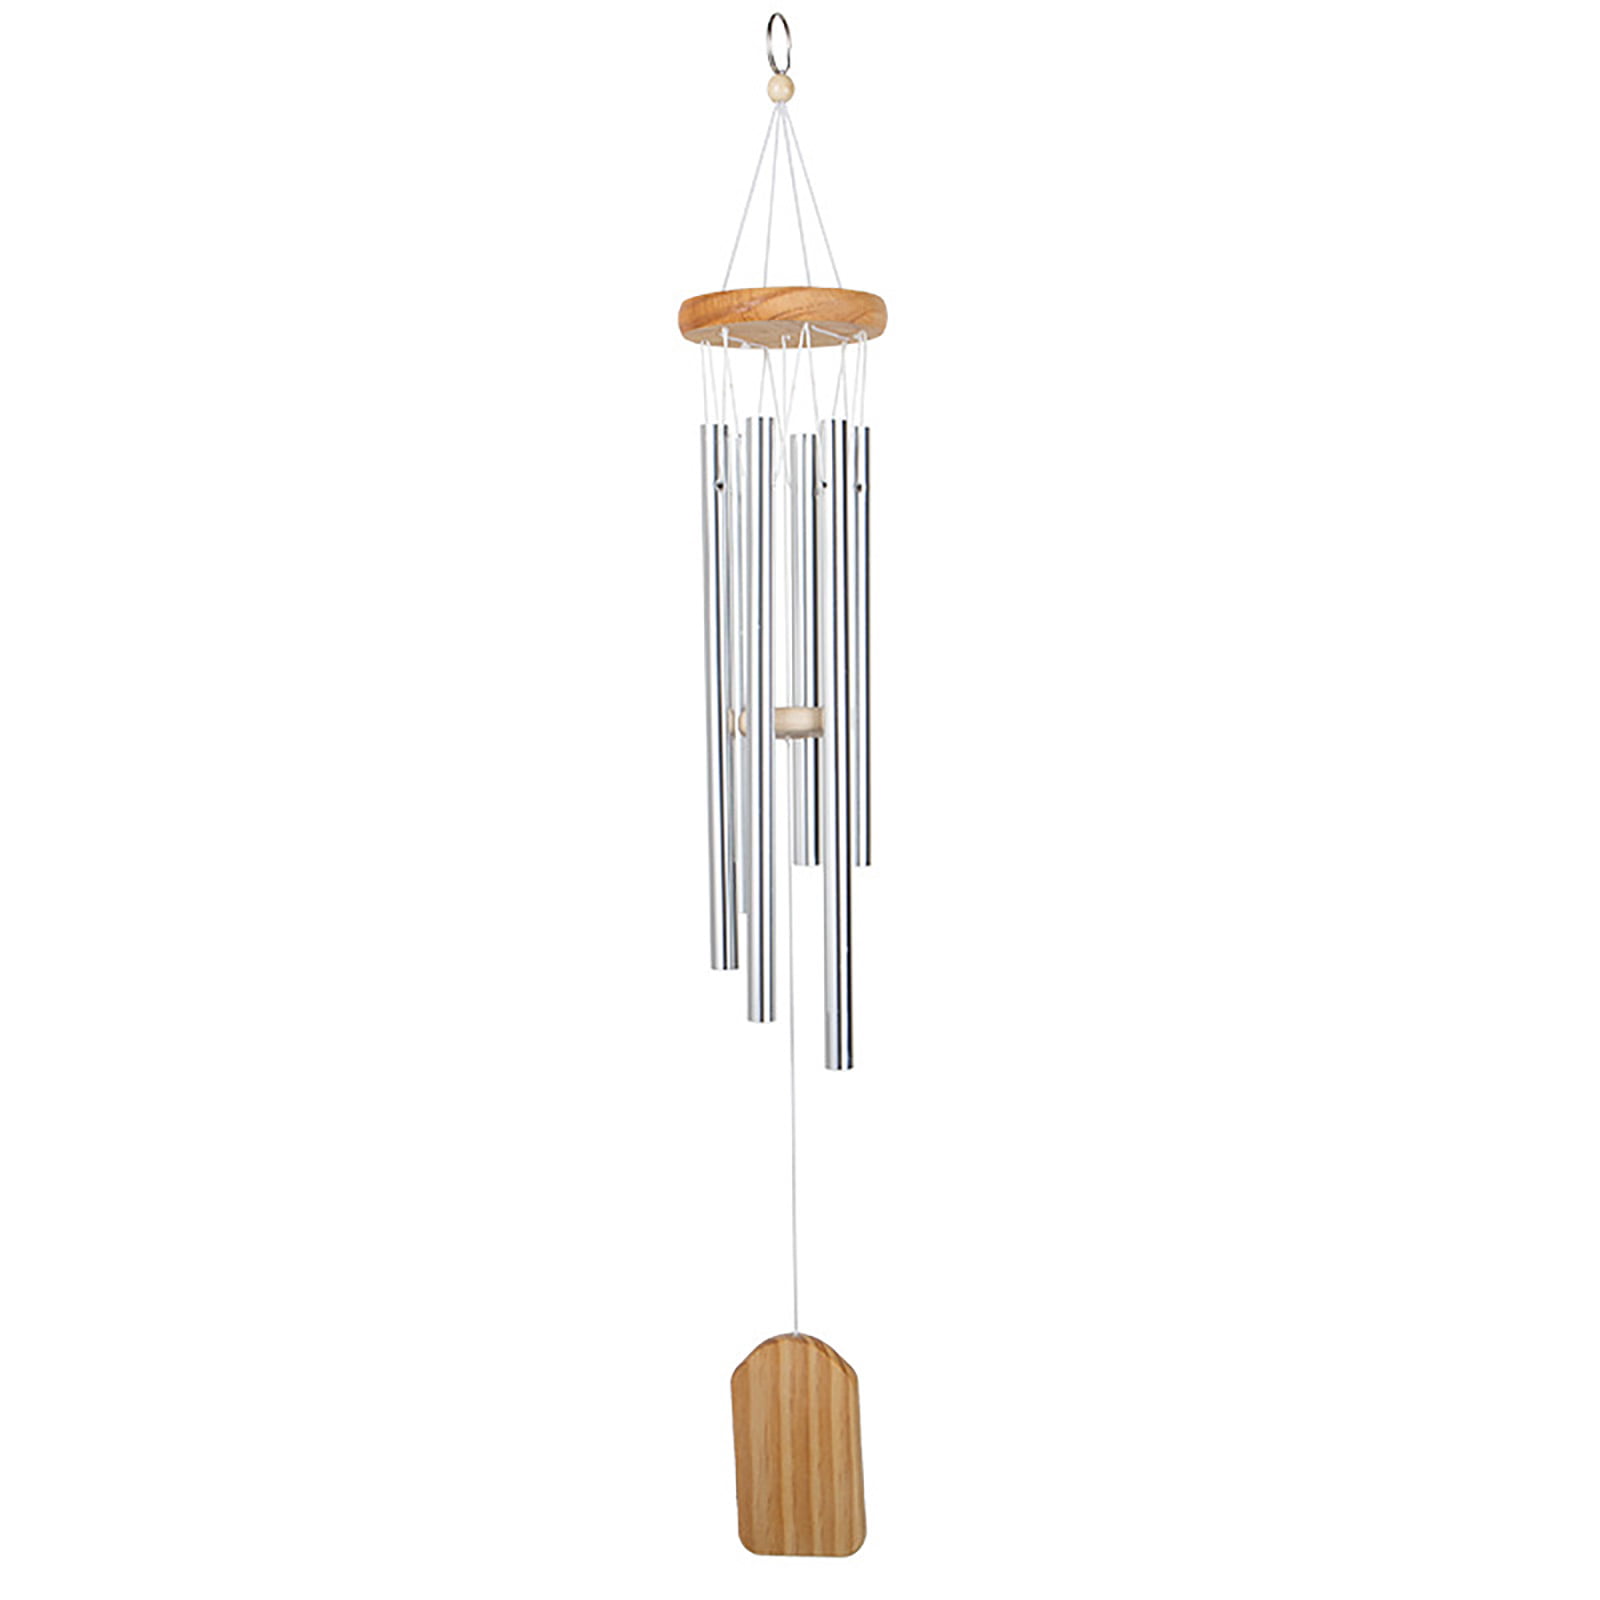 Details about   Fishbones Wind Chime Retro Ornaments Metal Garden Living Room Balcony Decoration 